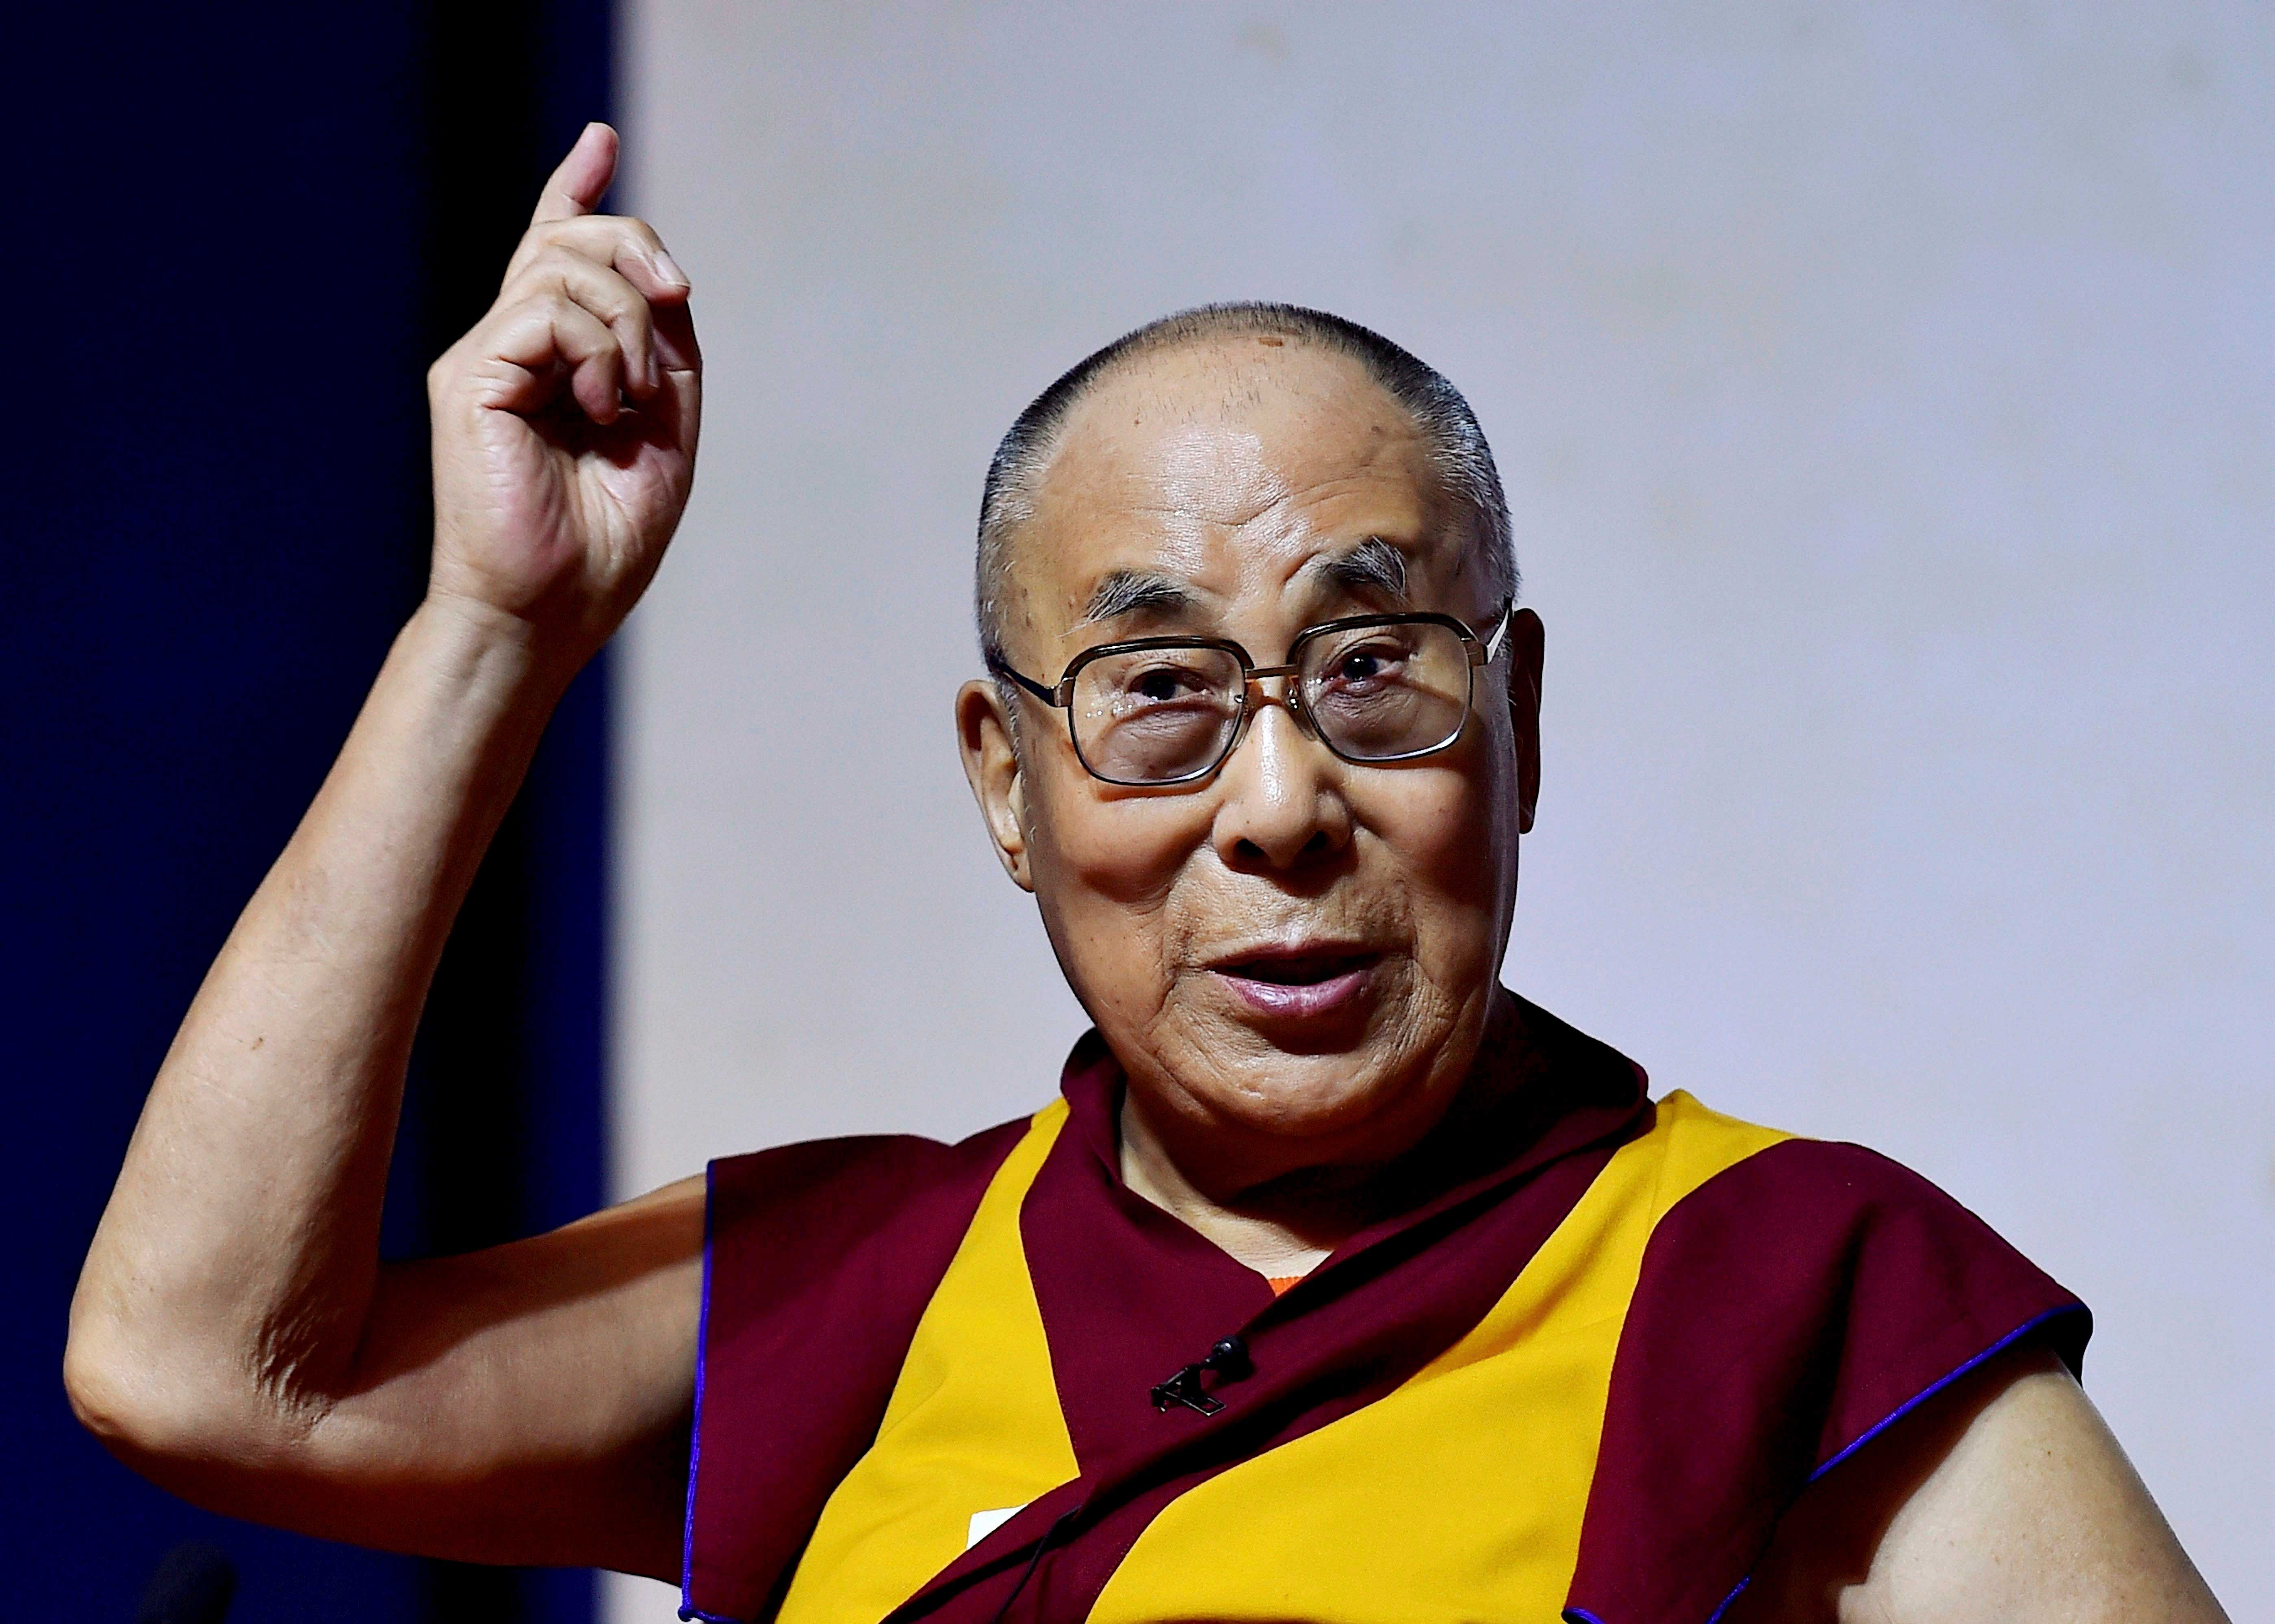 Mercedes-Benz apologized to Chinese consumers for an Instagram post showing one of its luxury cars along with a quote from exiled Tibetan spiritual leader Dalai Lama. PTI File Photo